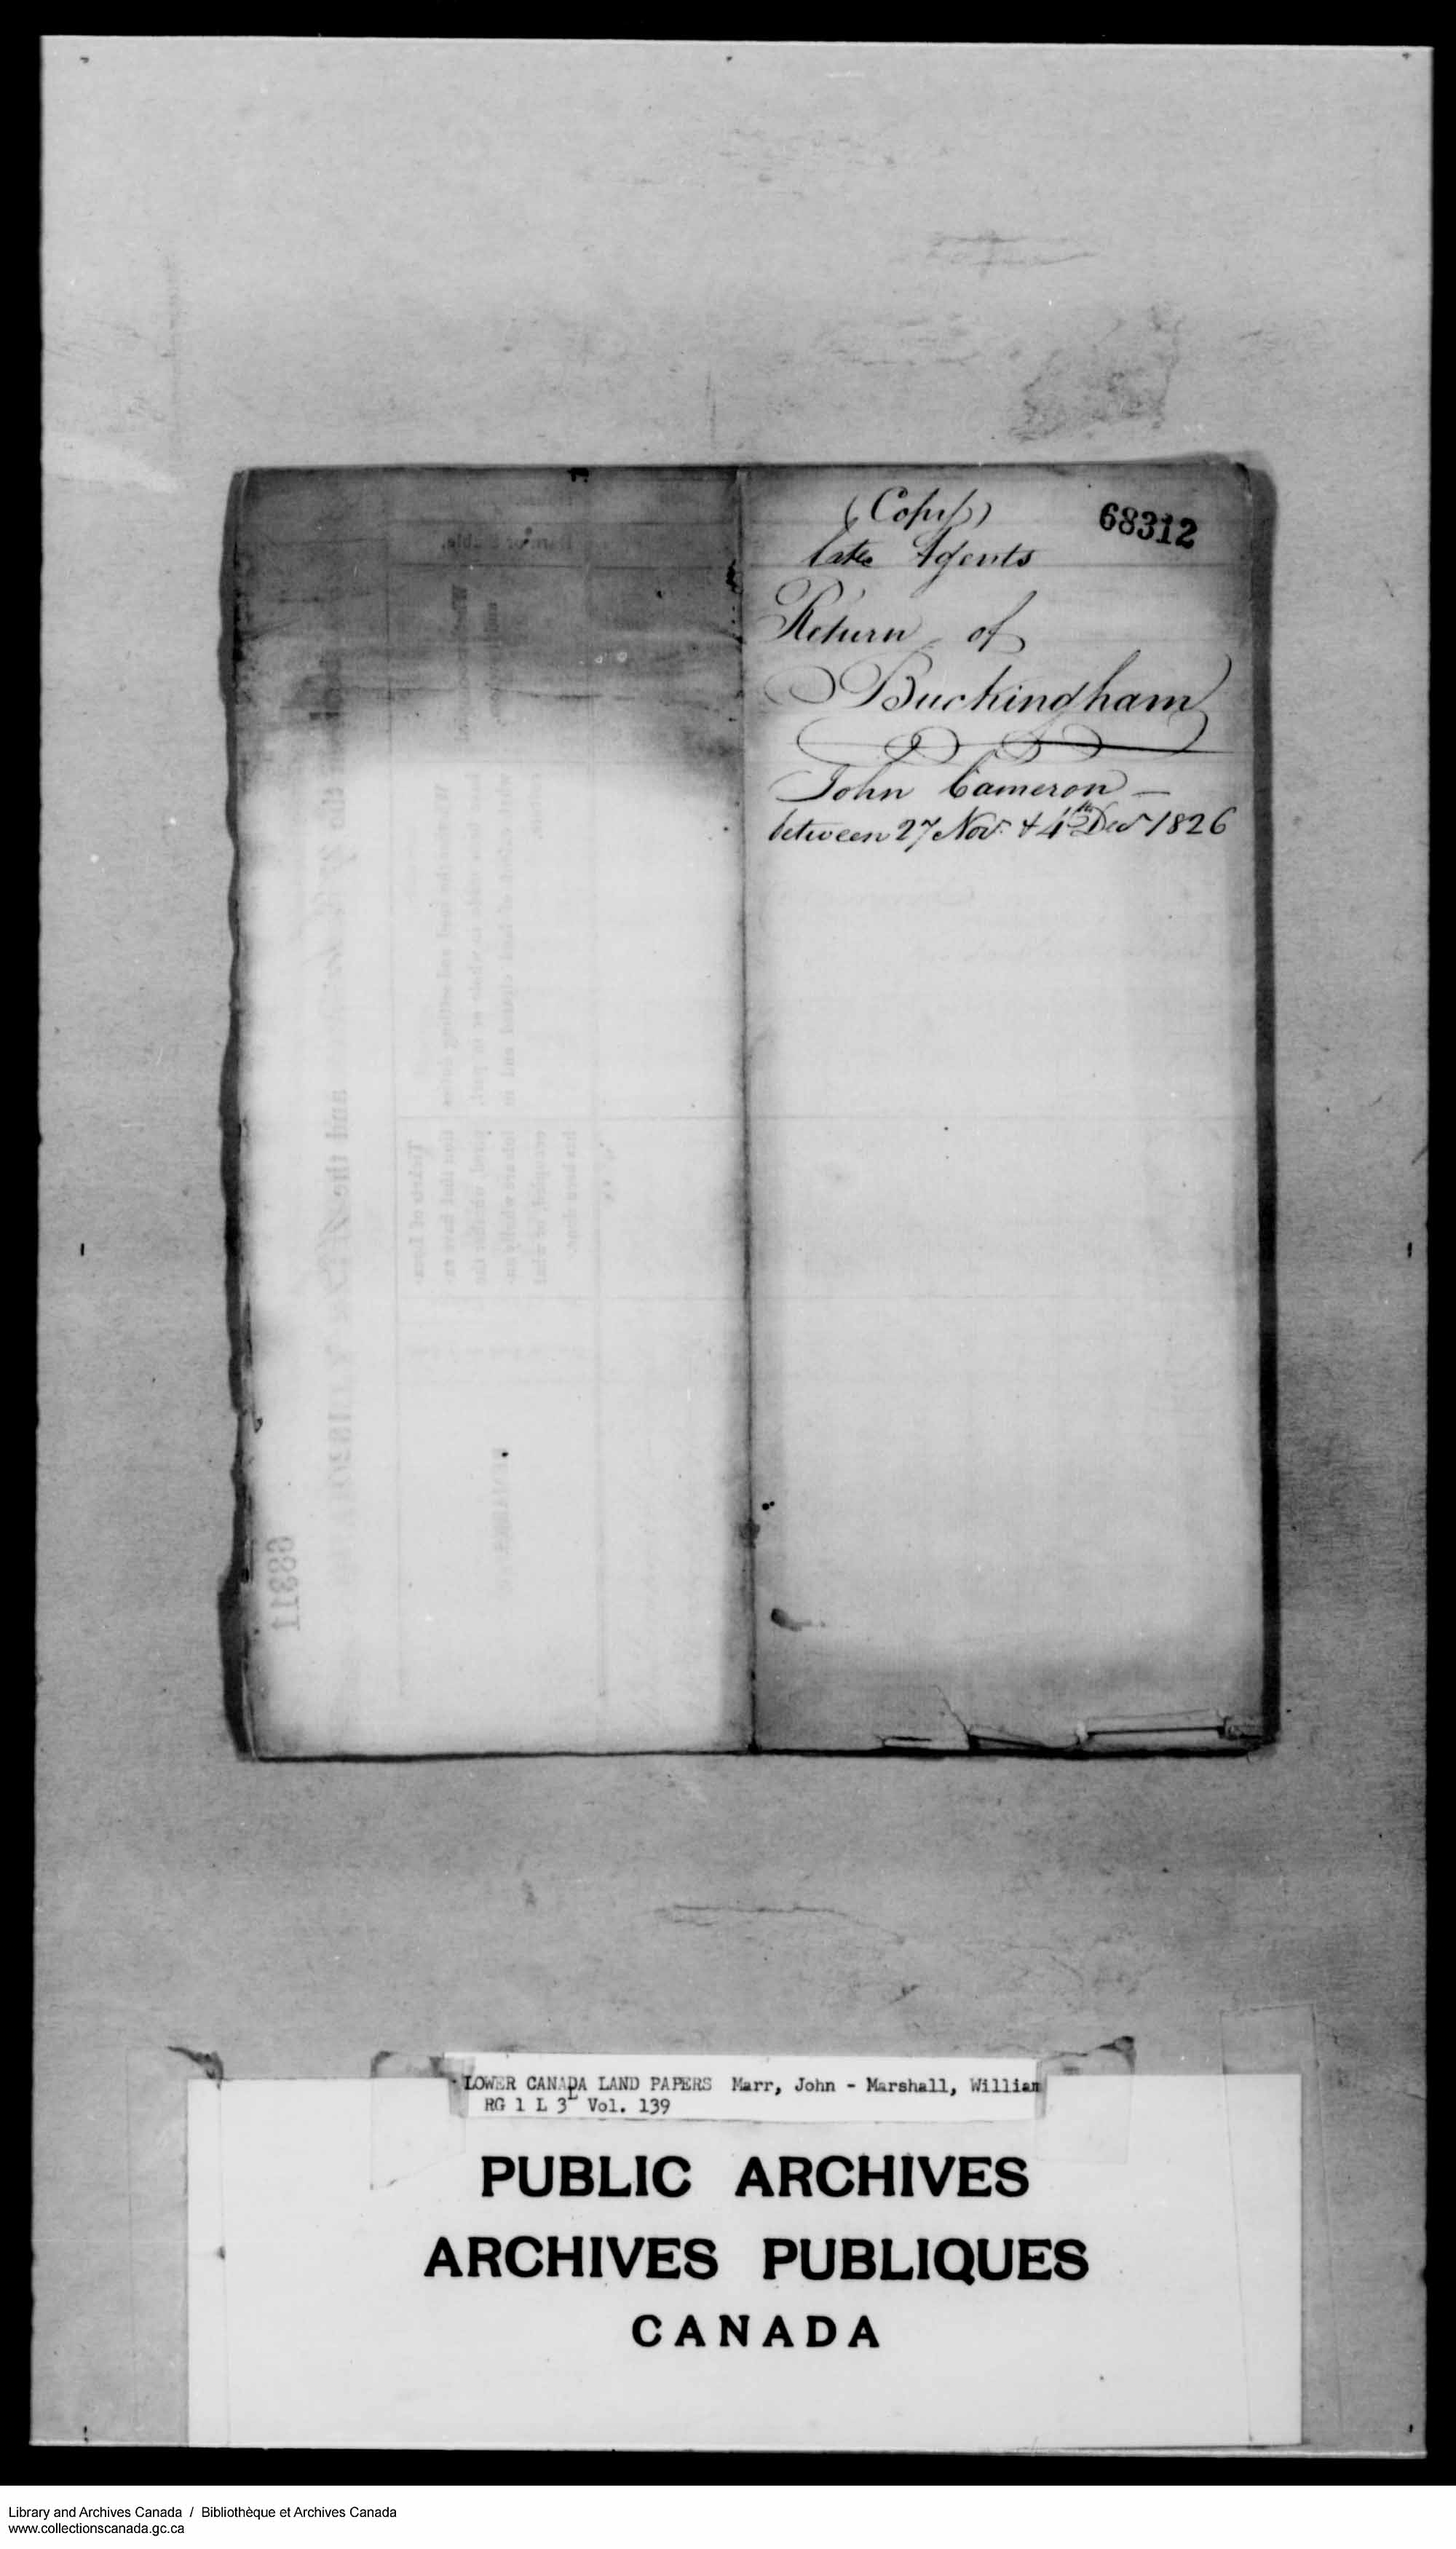 Digitized page of  for Image No.: e008713568